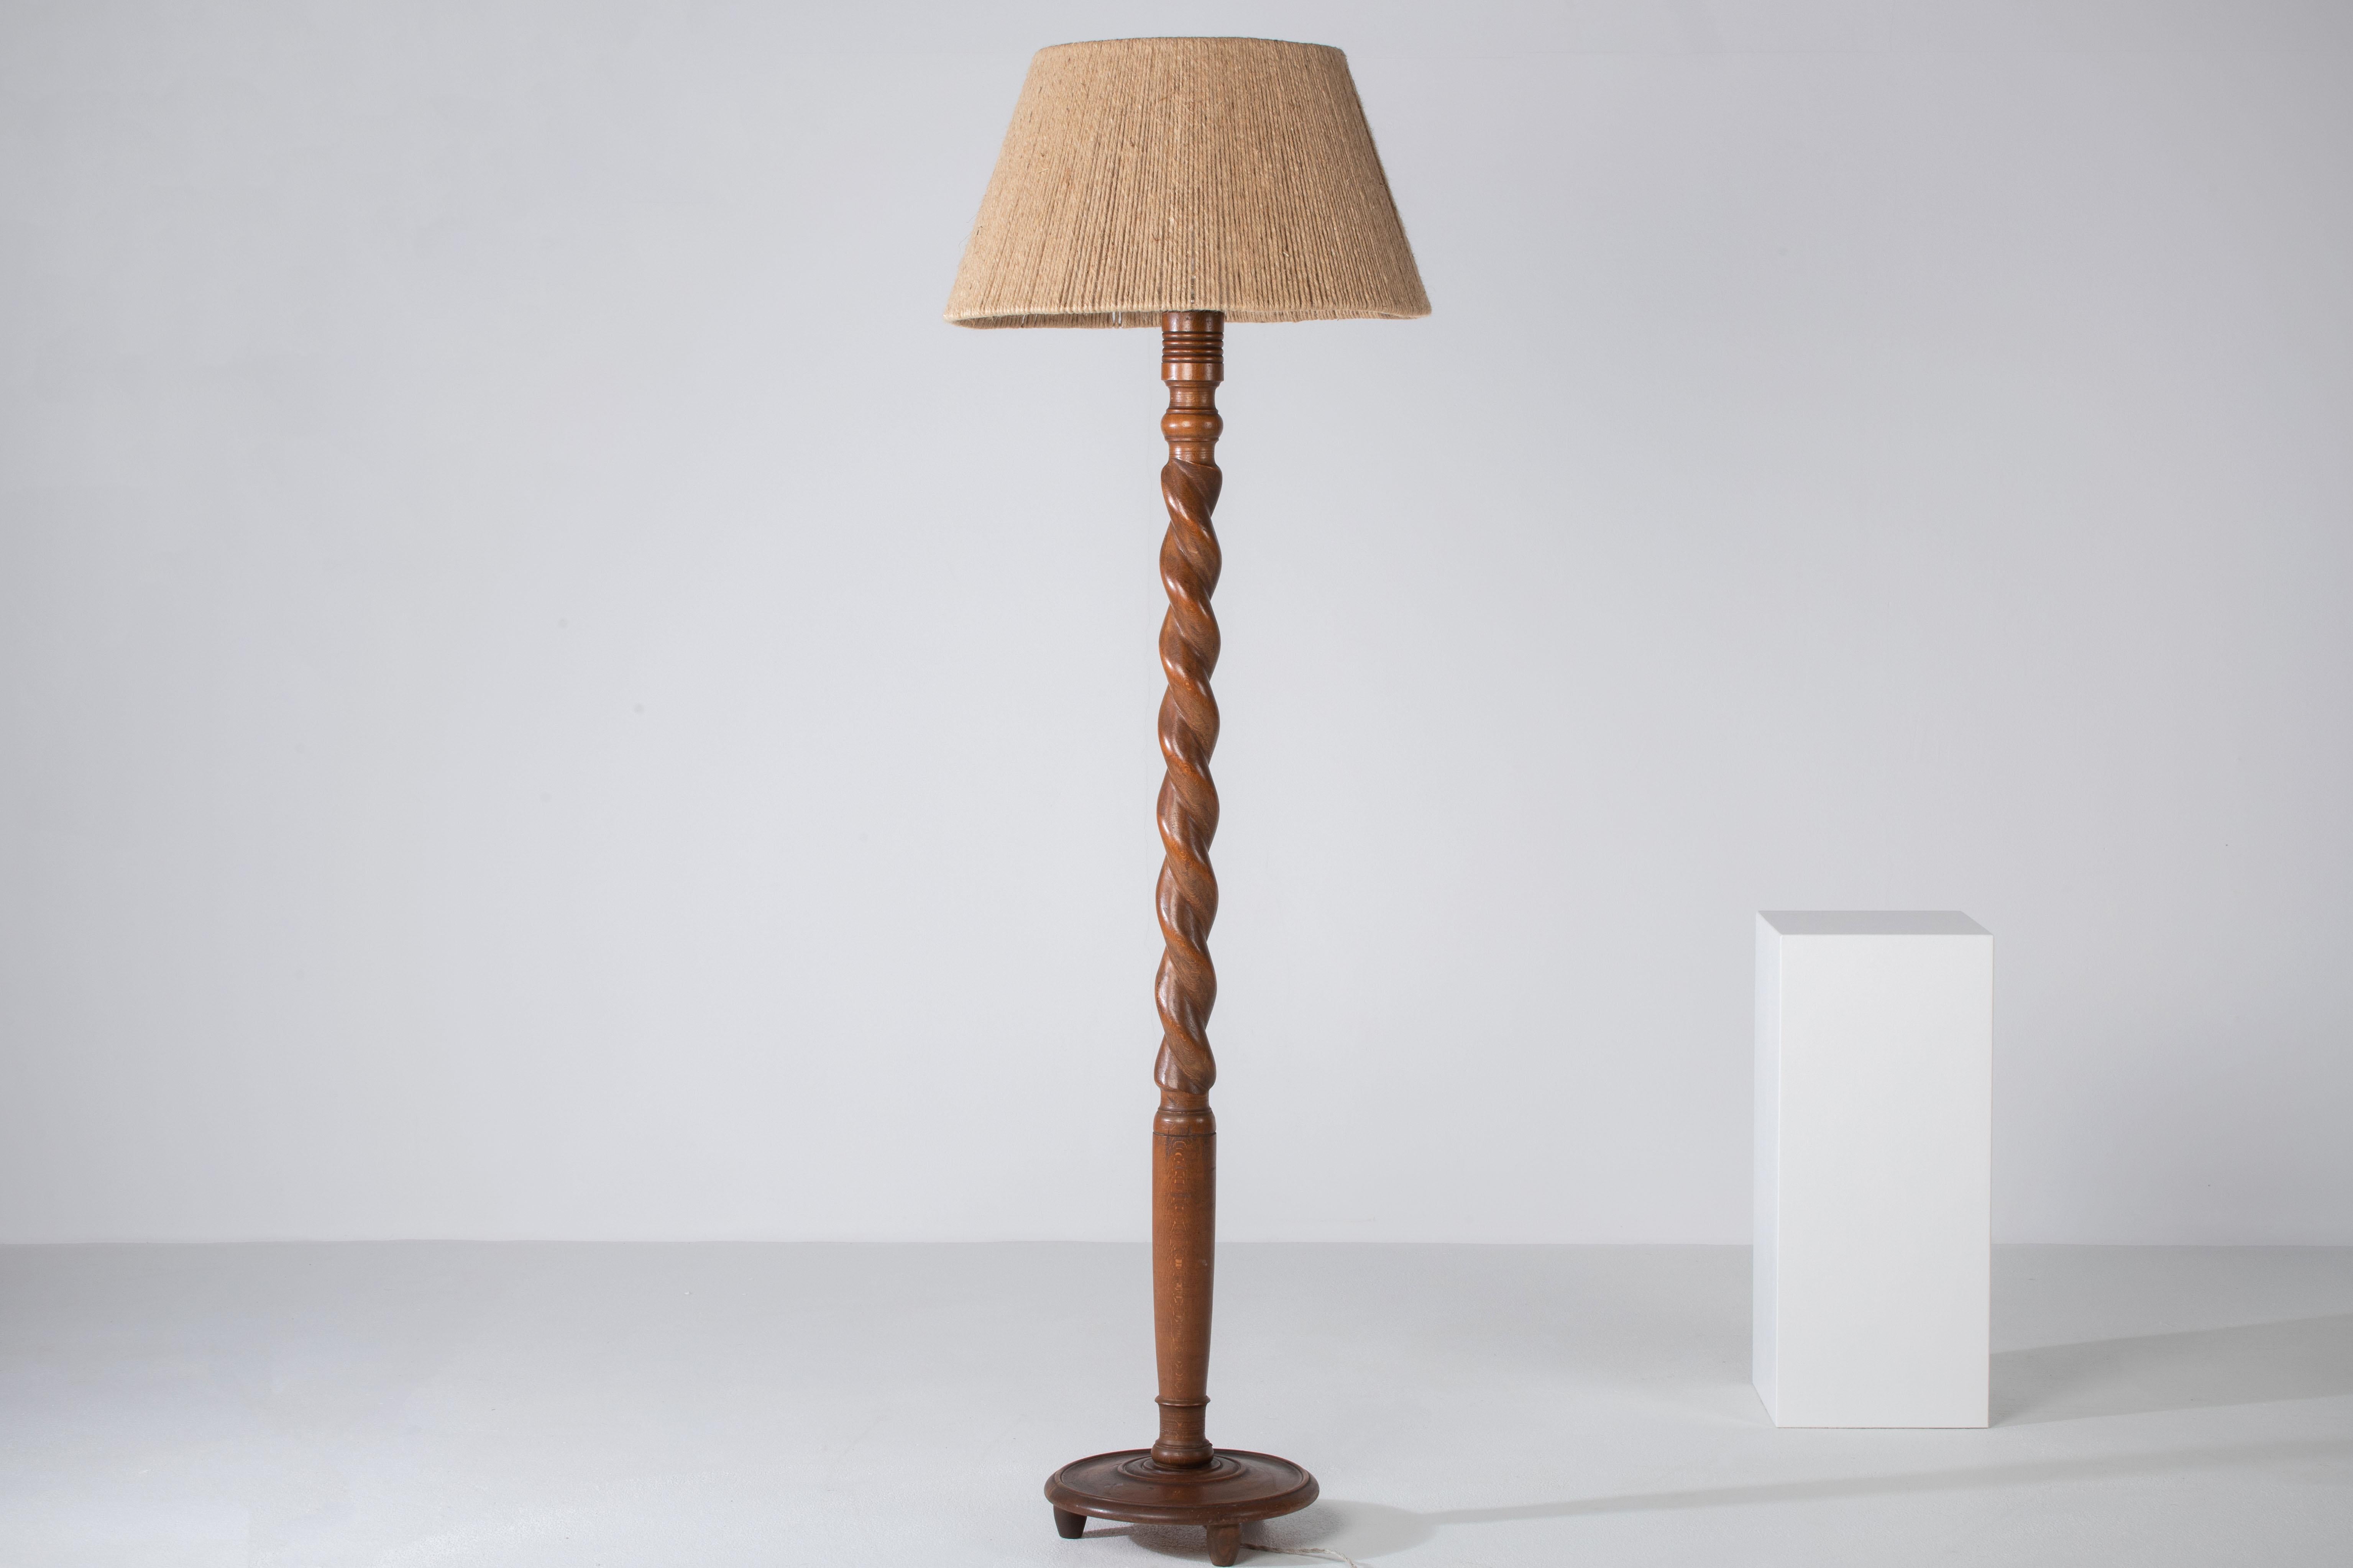 Twisted Oak Floor Lamp with Rope Lampshade, France 1940 For Sale 3